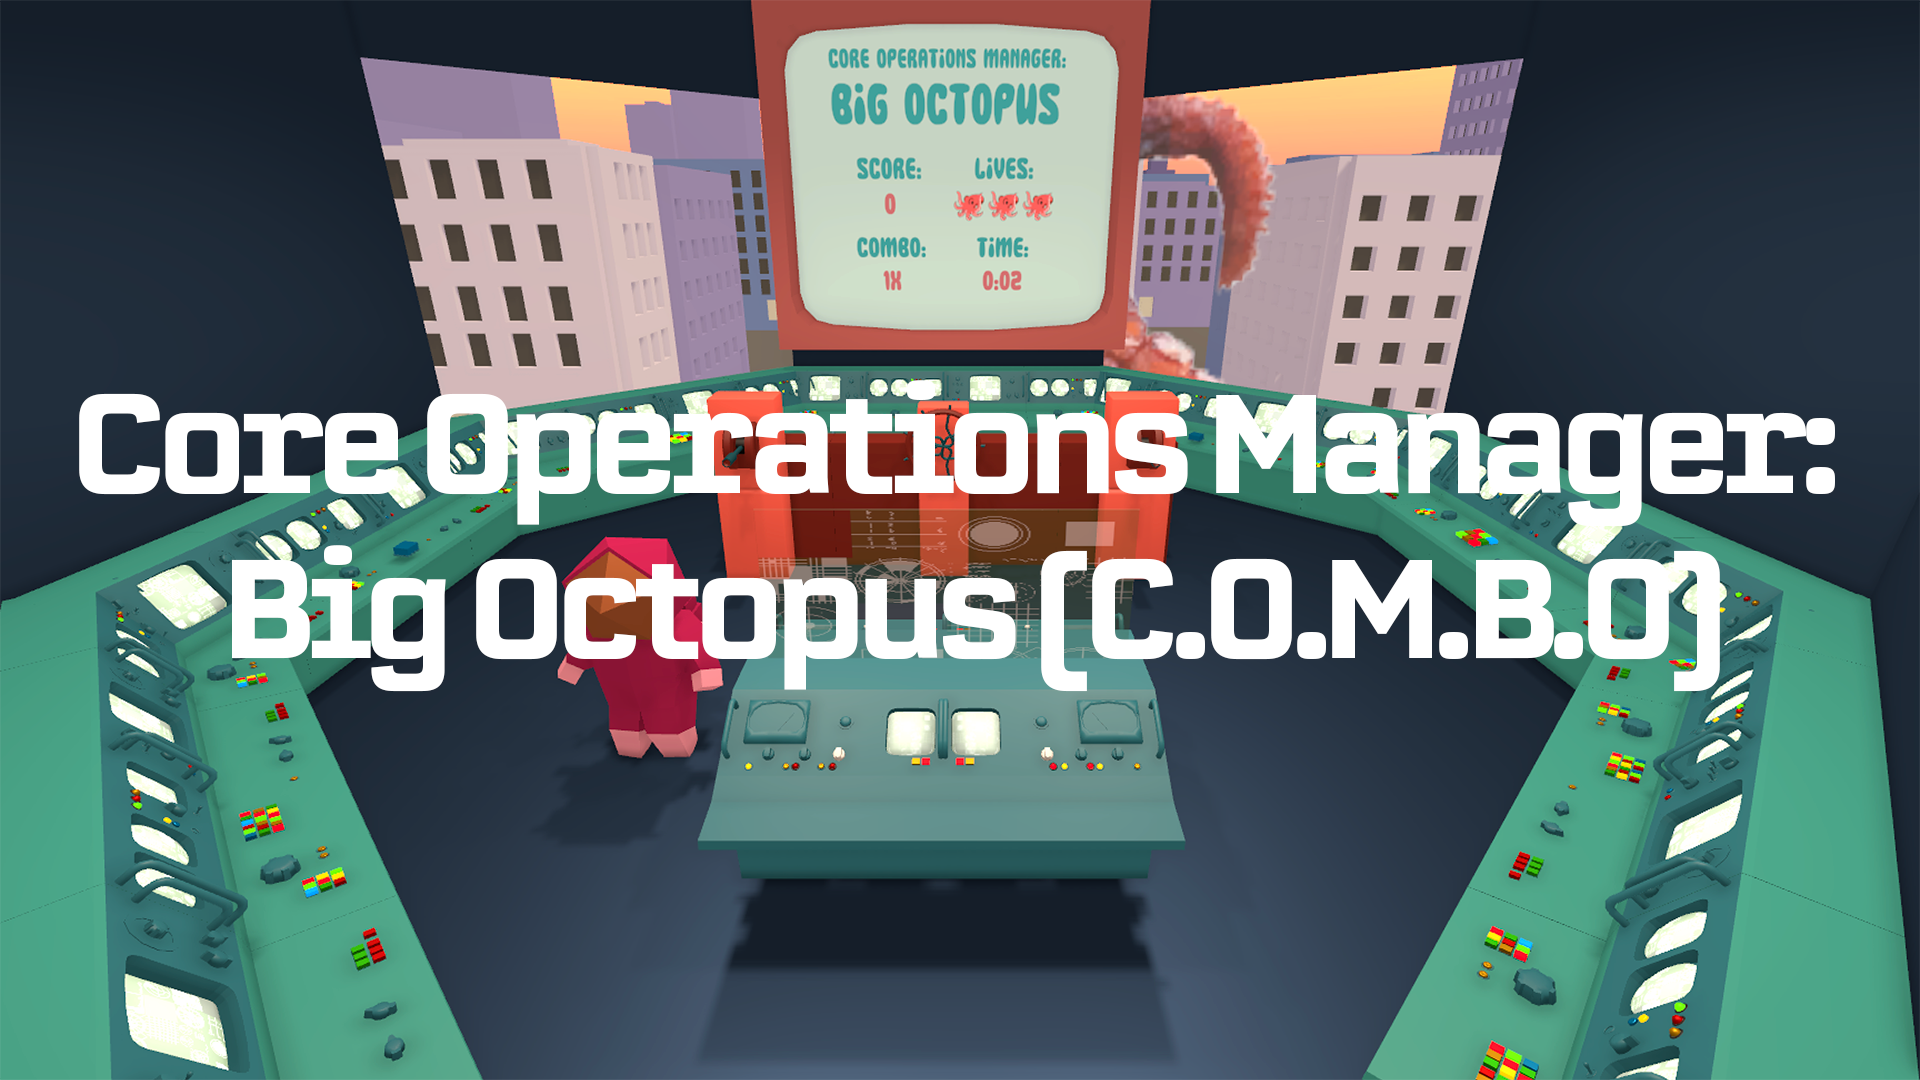 Chief Operations Manager: Big Octopus (C.O.M.B.O.)